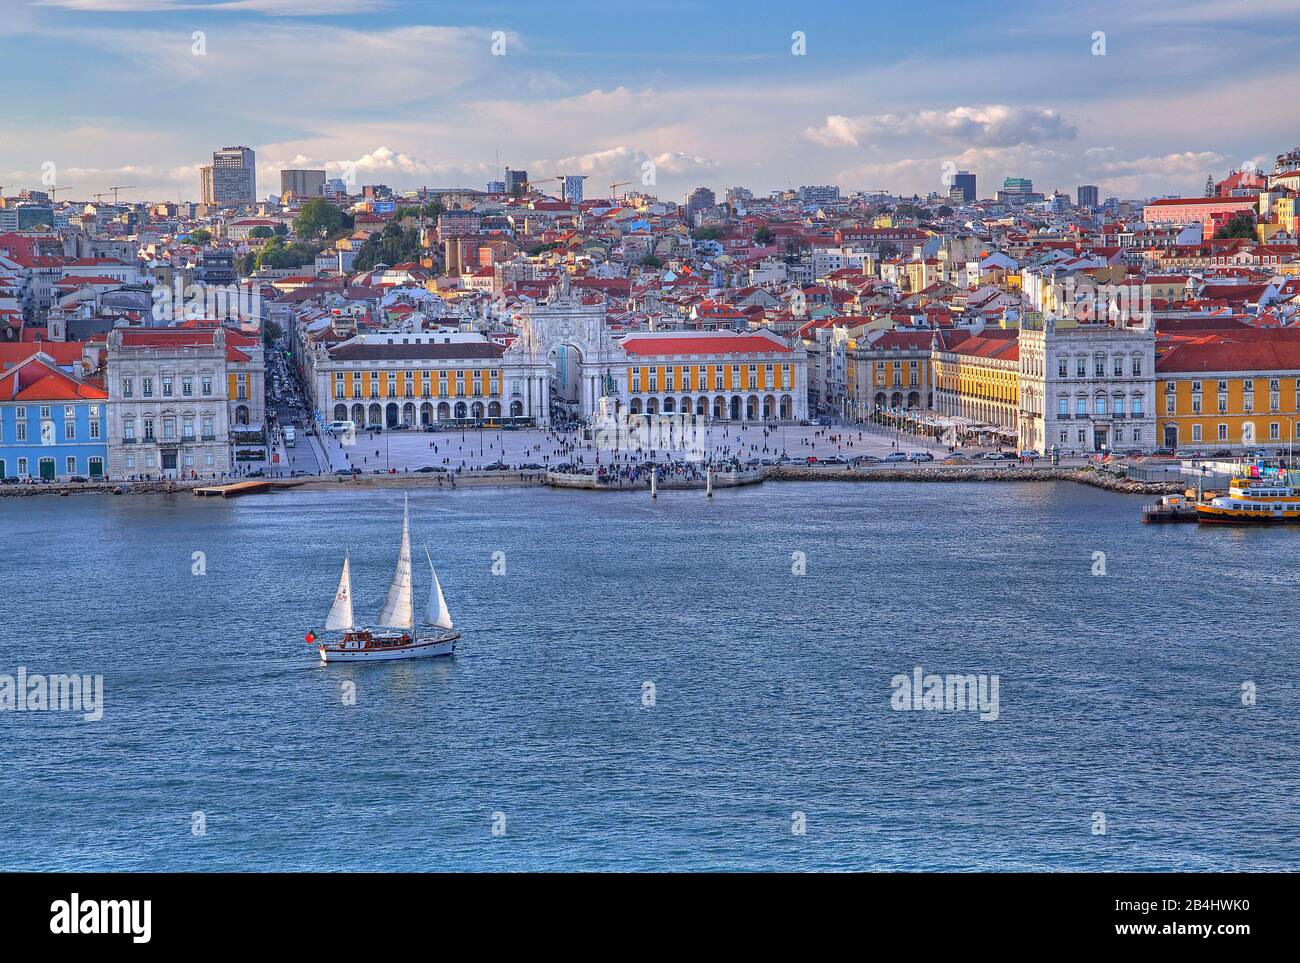 Waterfront of the city on the Tejo with the Praca do Comercio square in the center, Lisbon, Portugal Stock Photo